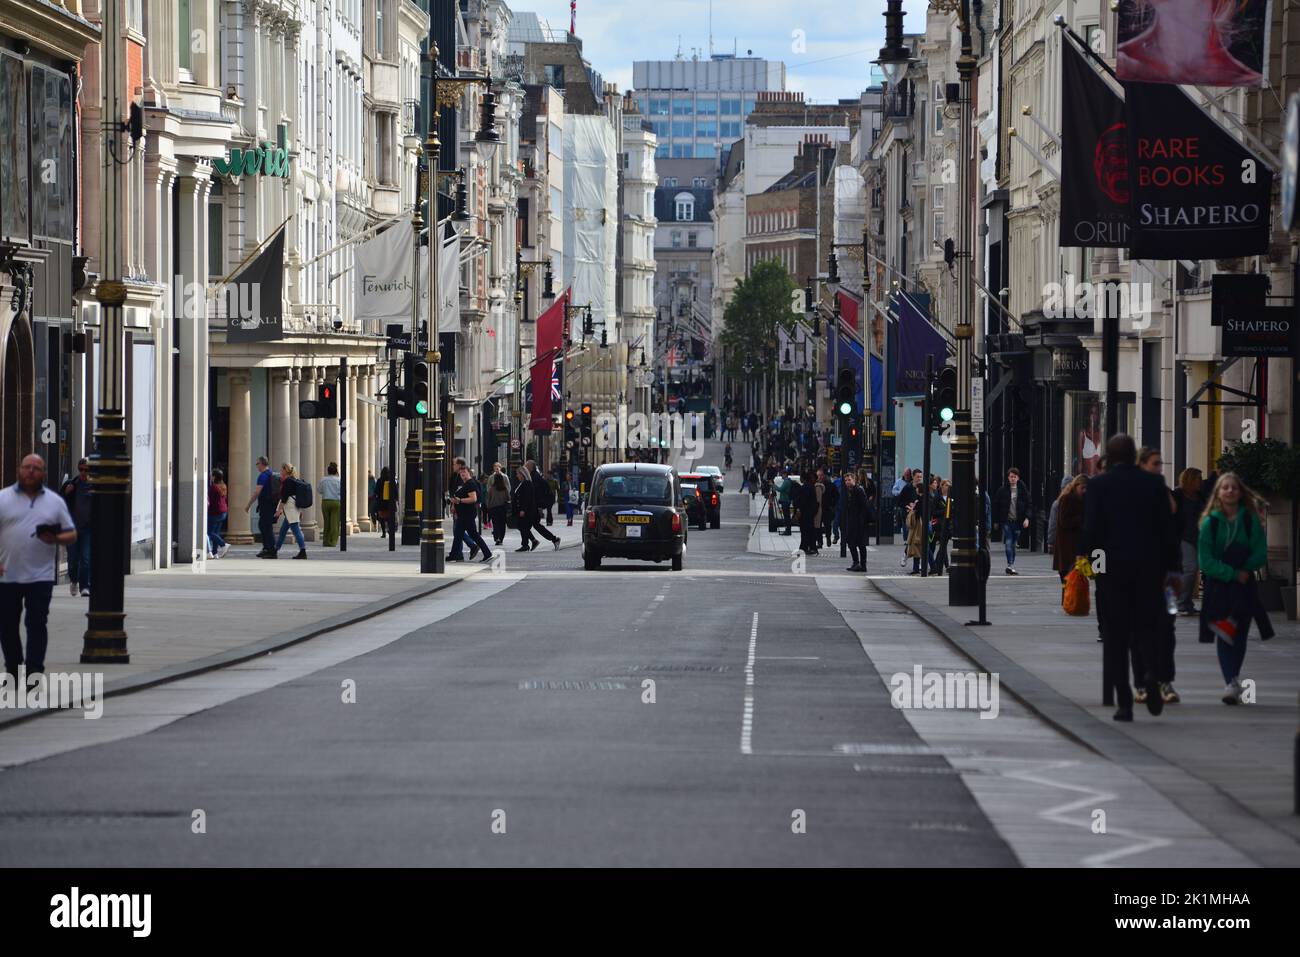 State funeral of Her Majesty Queen Elizabeth II, London, UK, Monday 19th September 2022. Traffic free New Bond Street. Stock Photo